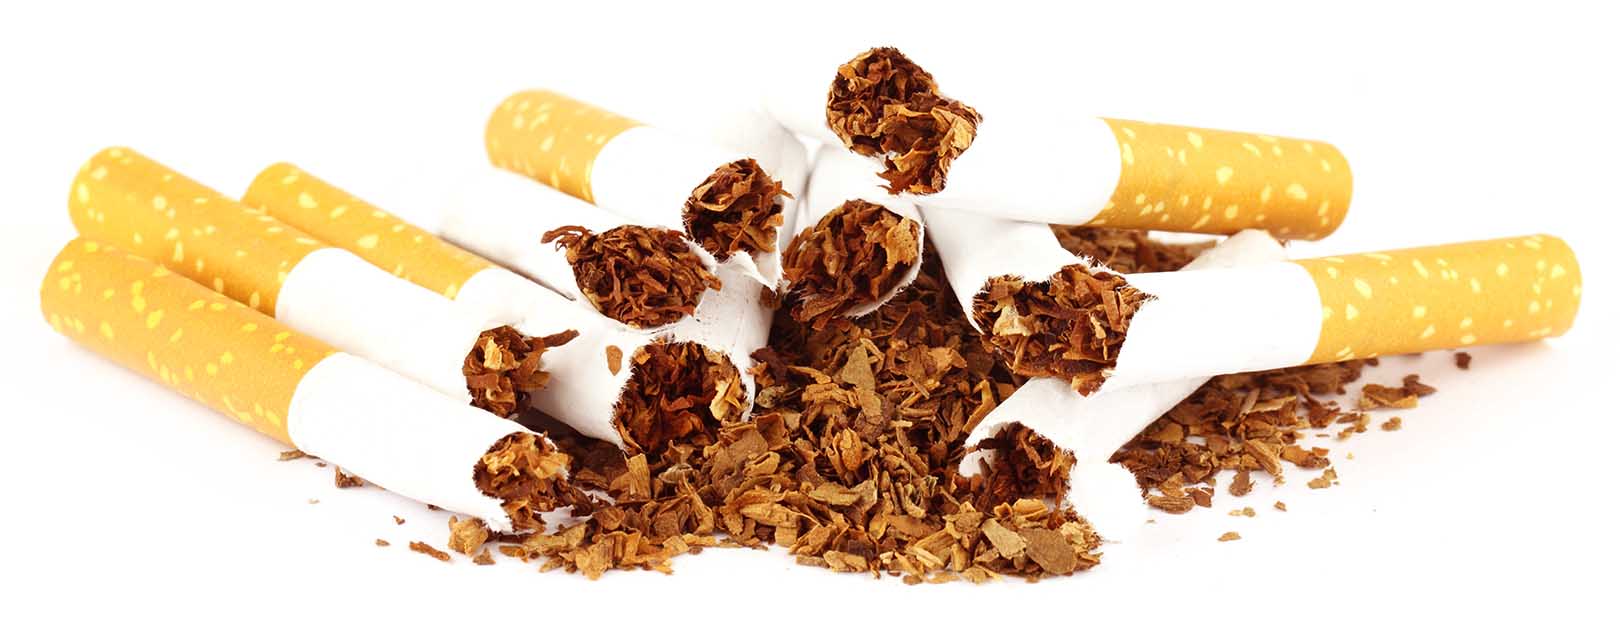 HC questions Govt on pictorial warning on tobacco